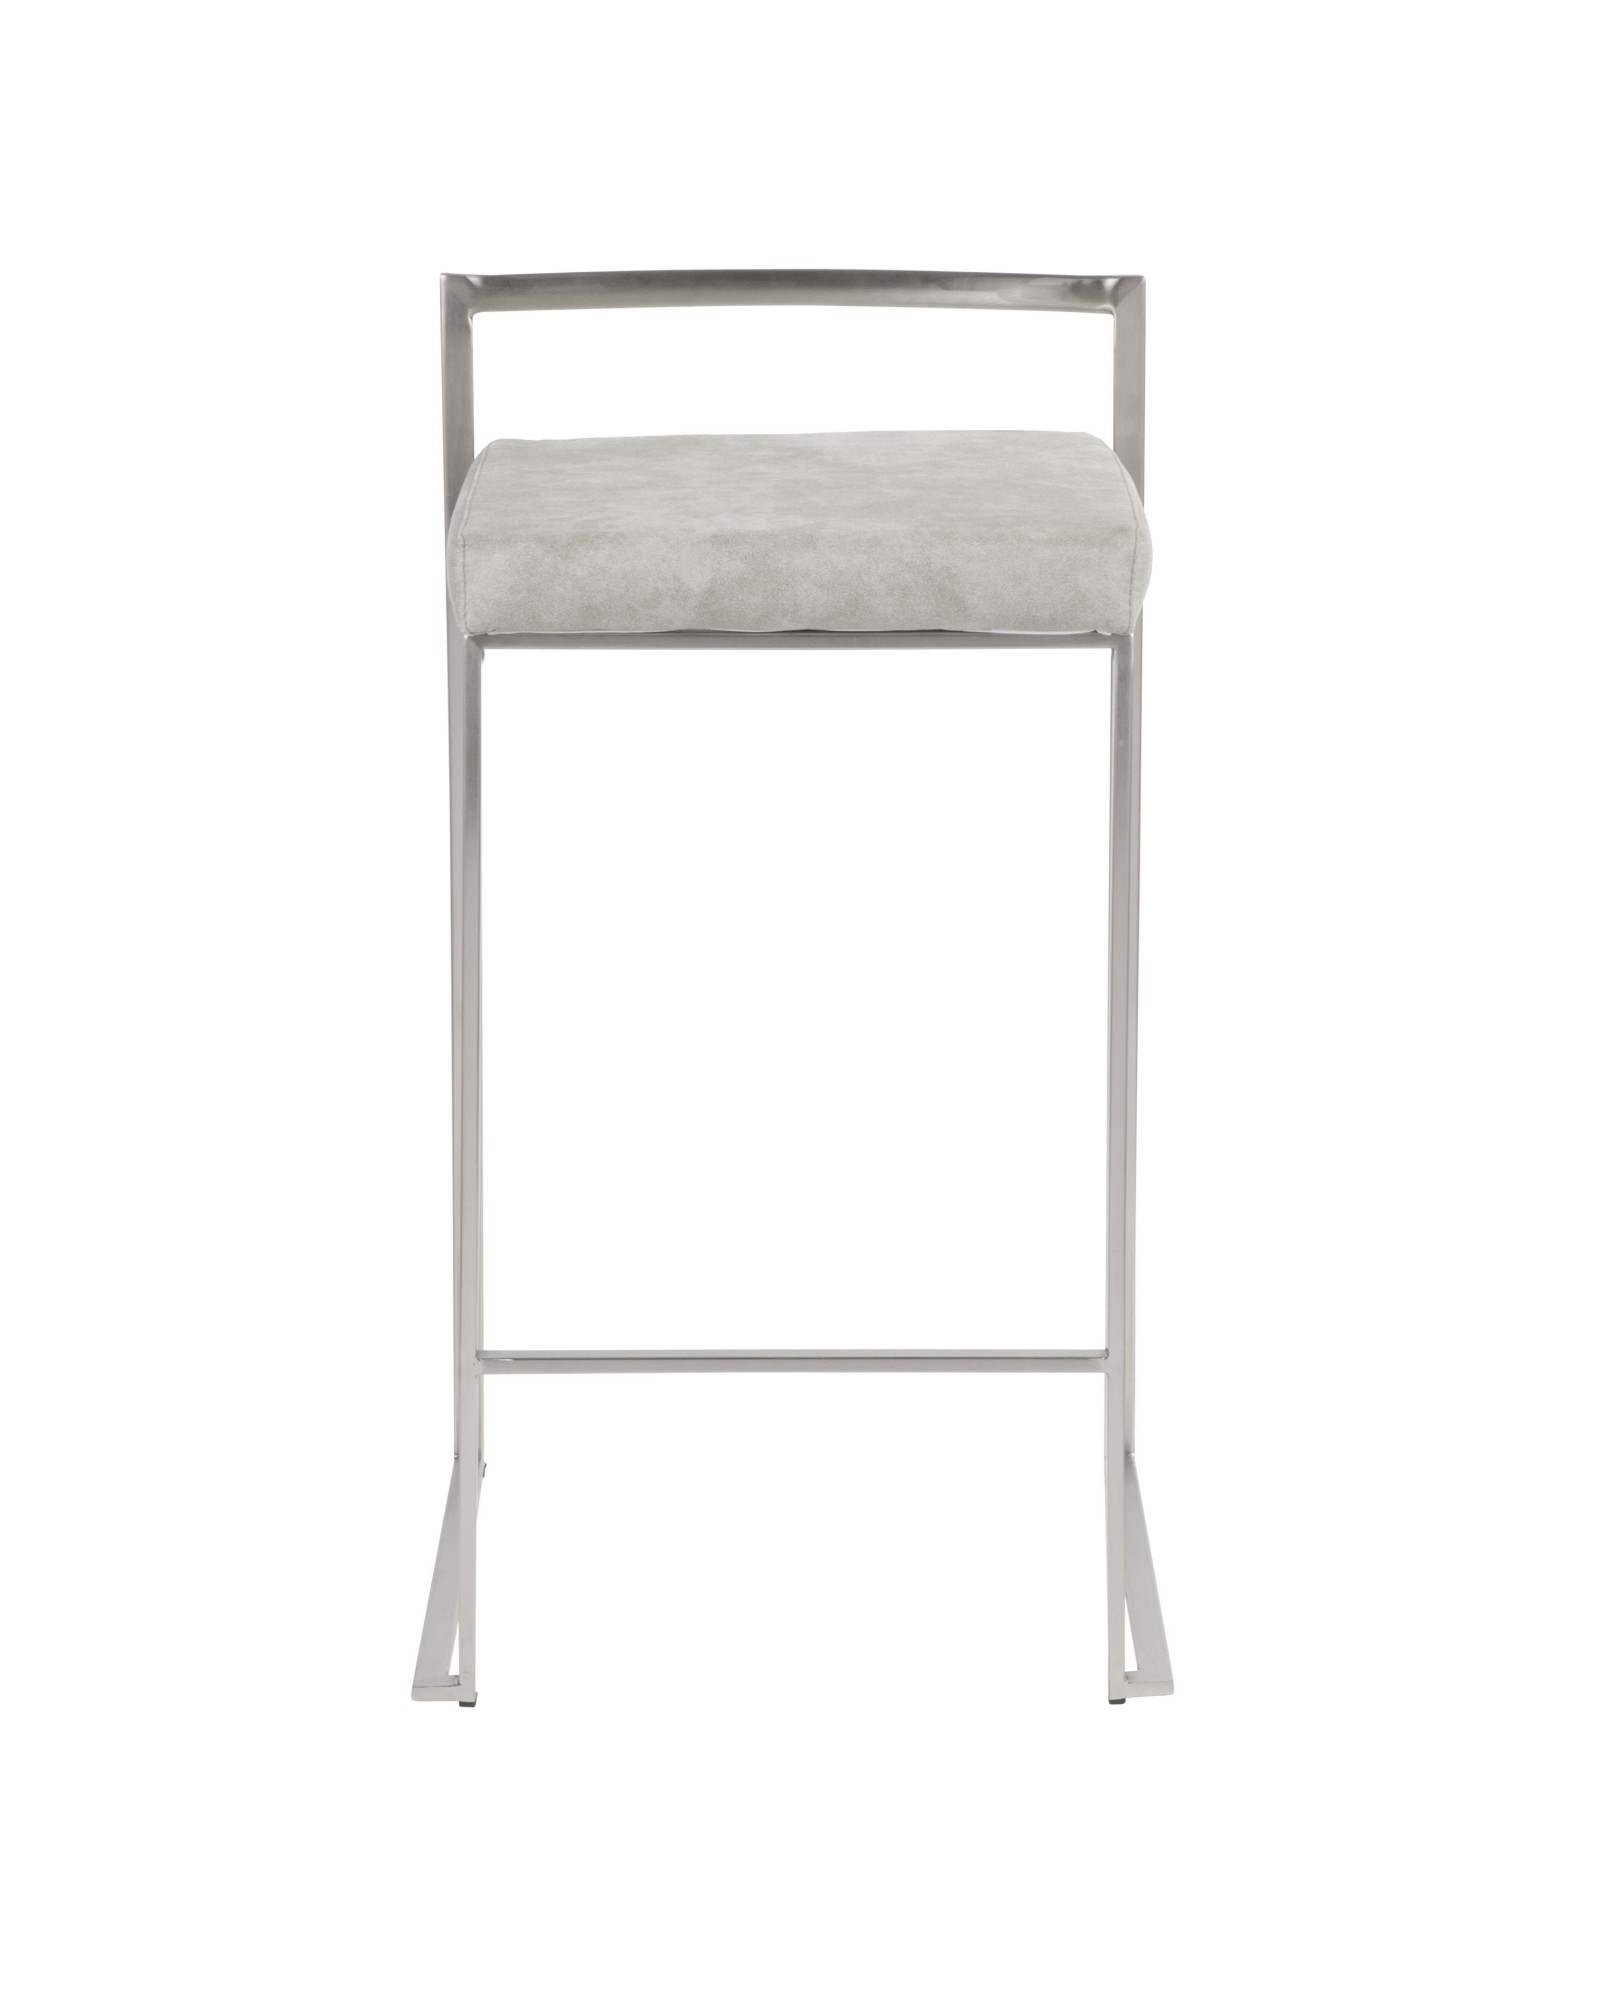 Fuji Contemporary Stackable Counter Stool in Stainless Steel with Light Grey Cowboy Fabric Cushion - Set of 2